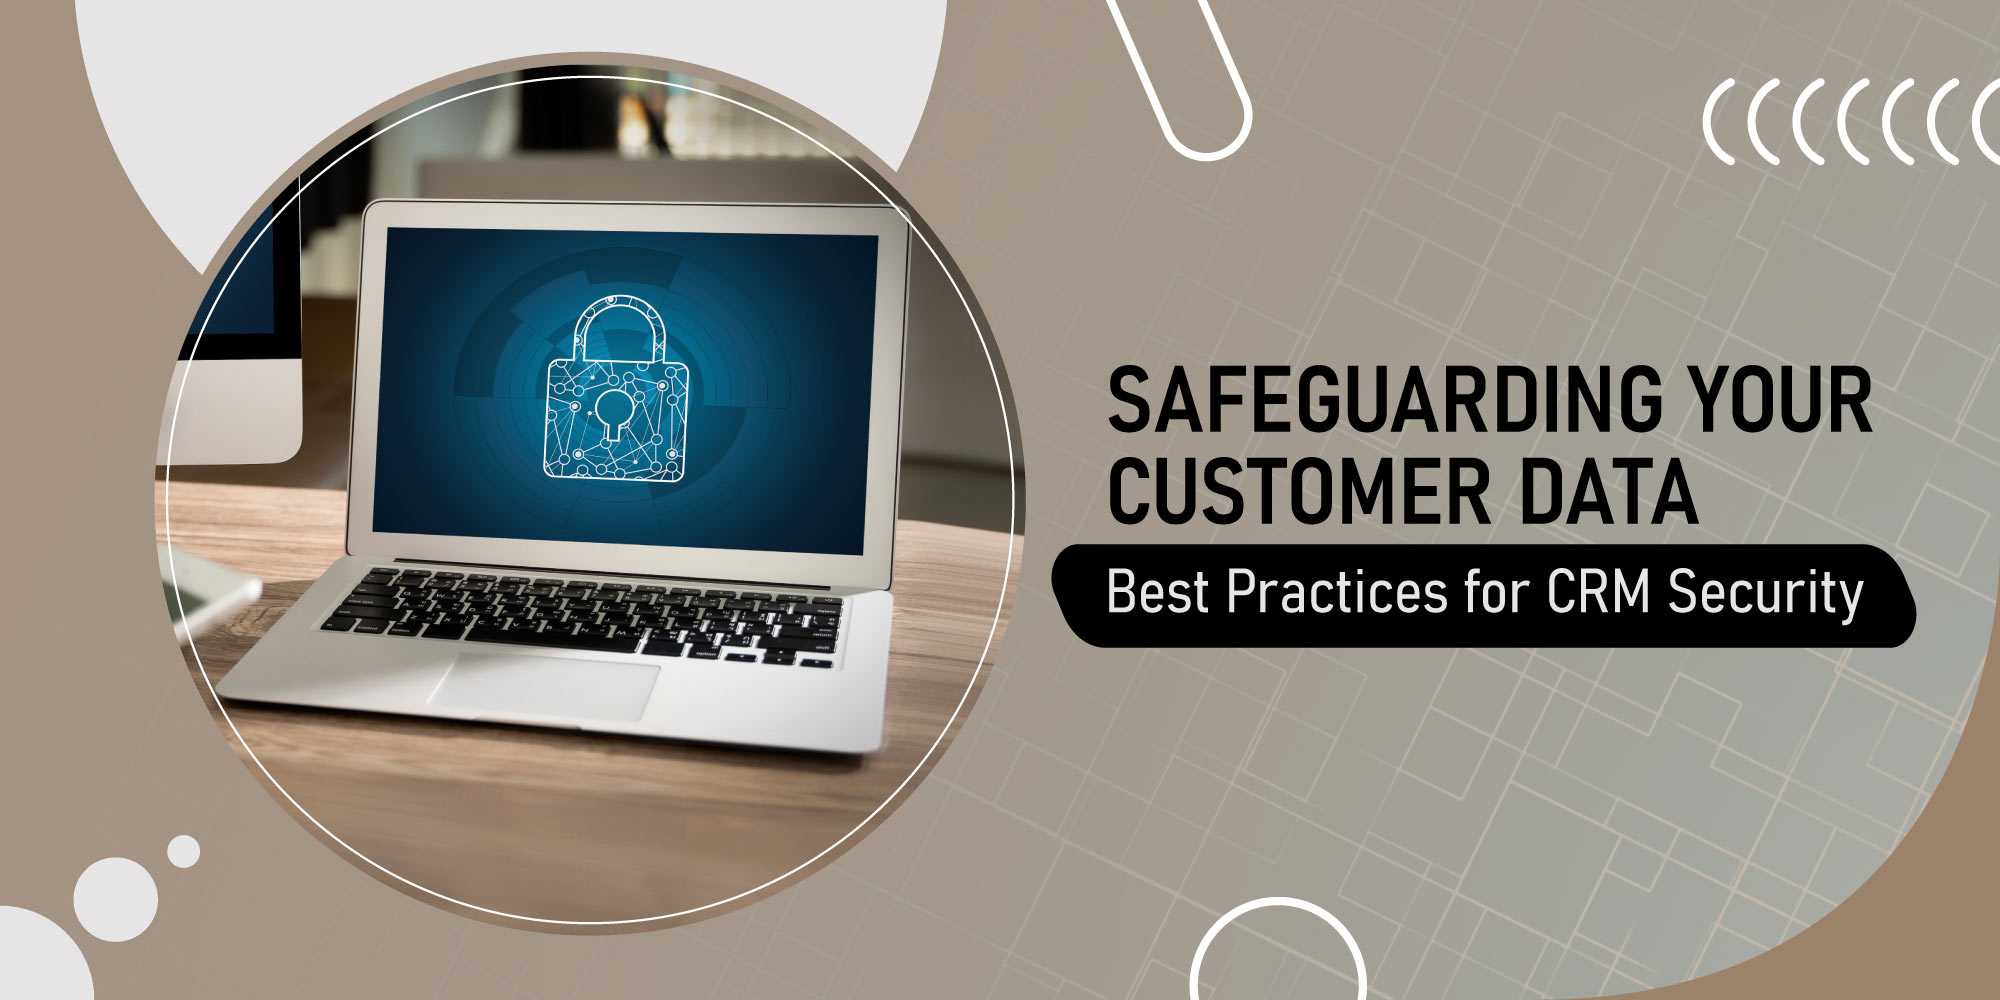 Best Practices for CRM Security